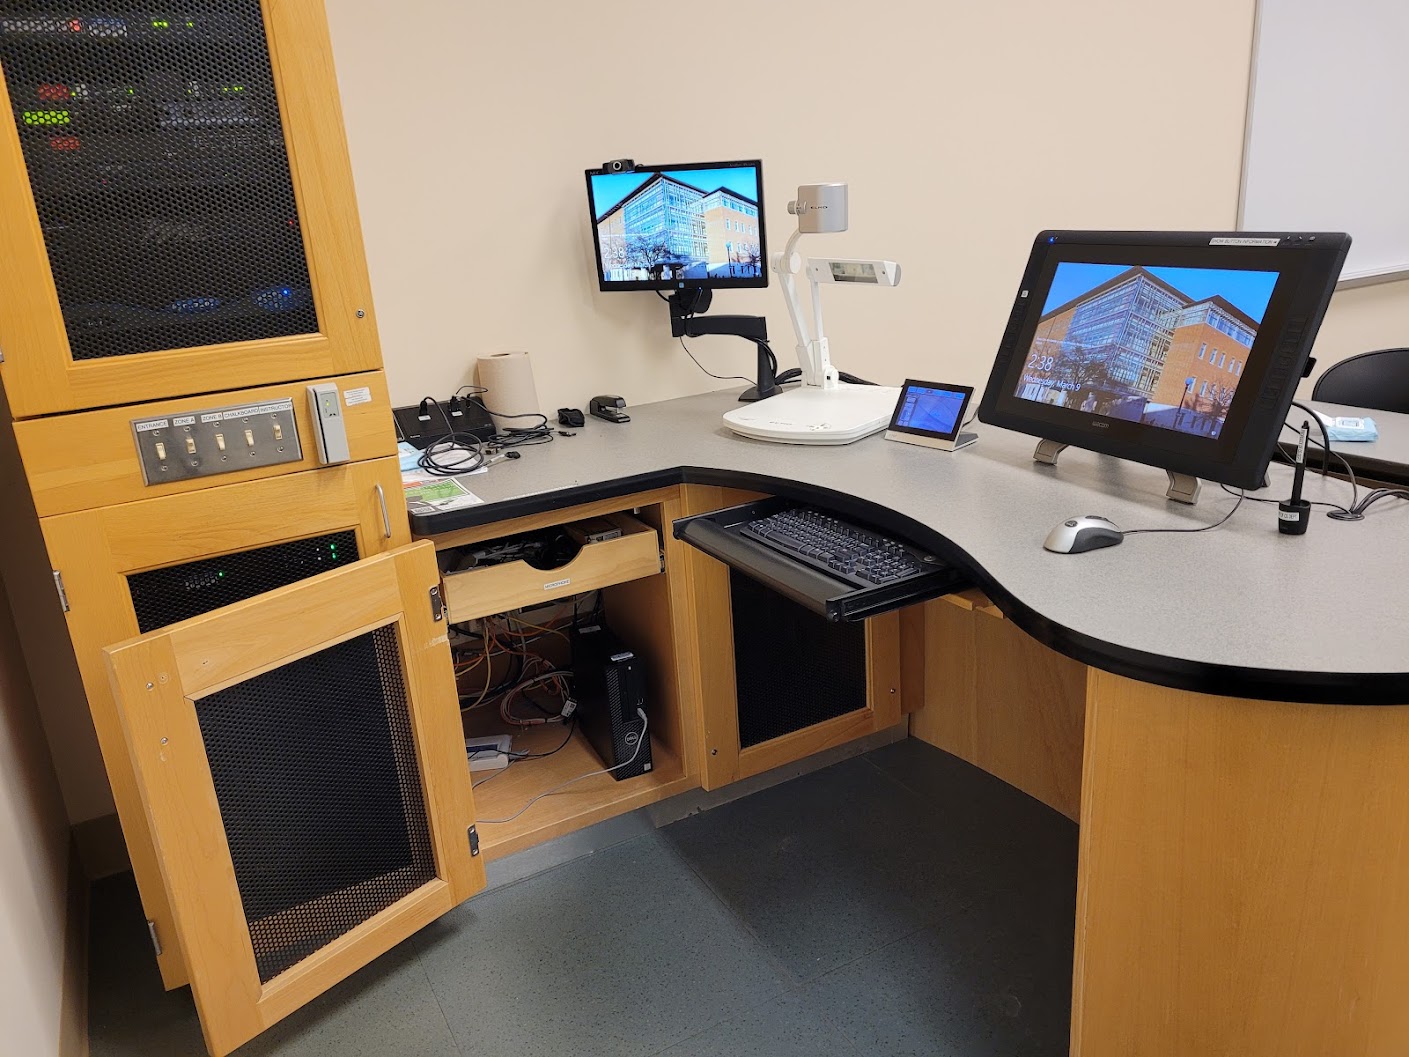 A view of the open cabinet with a PC, Wireles, HDMI and VGA inputs, a touch panel controller, and document camera. 